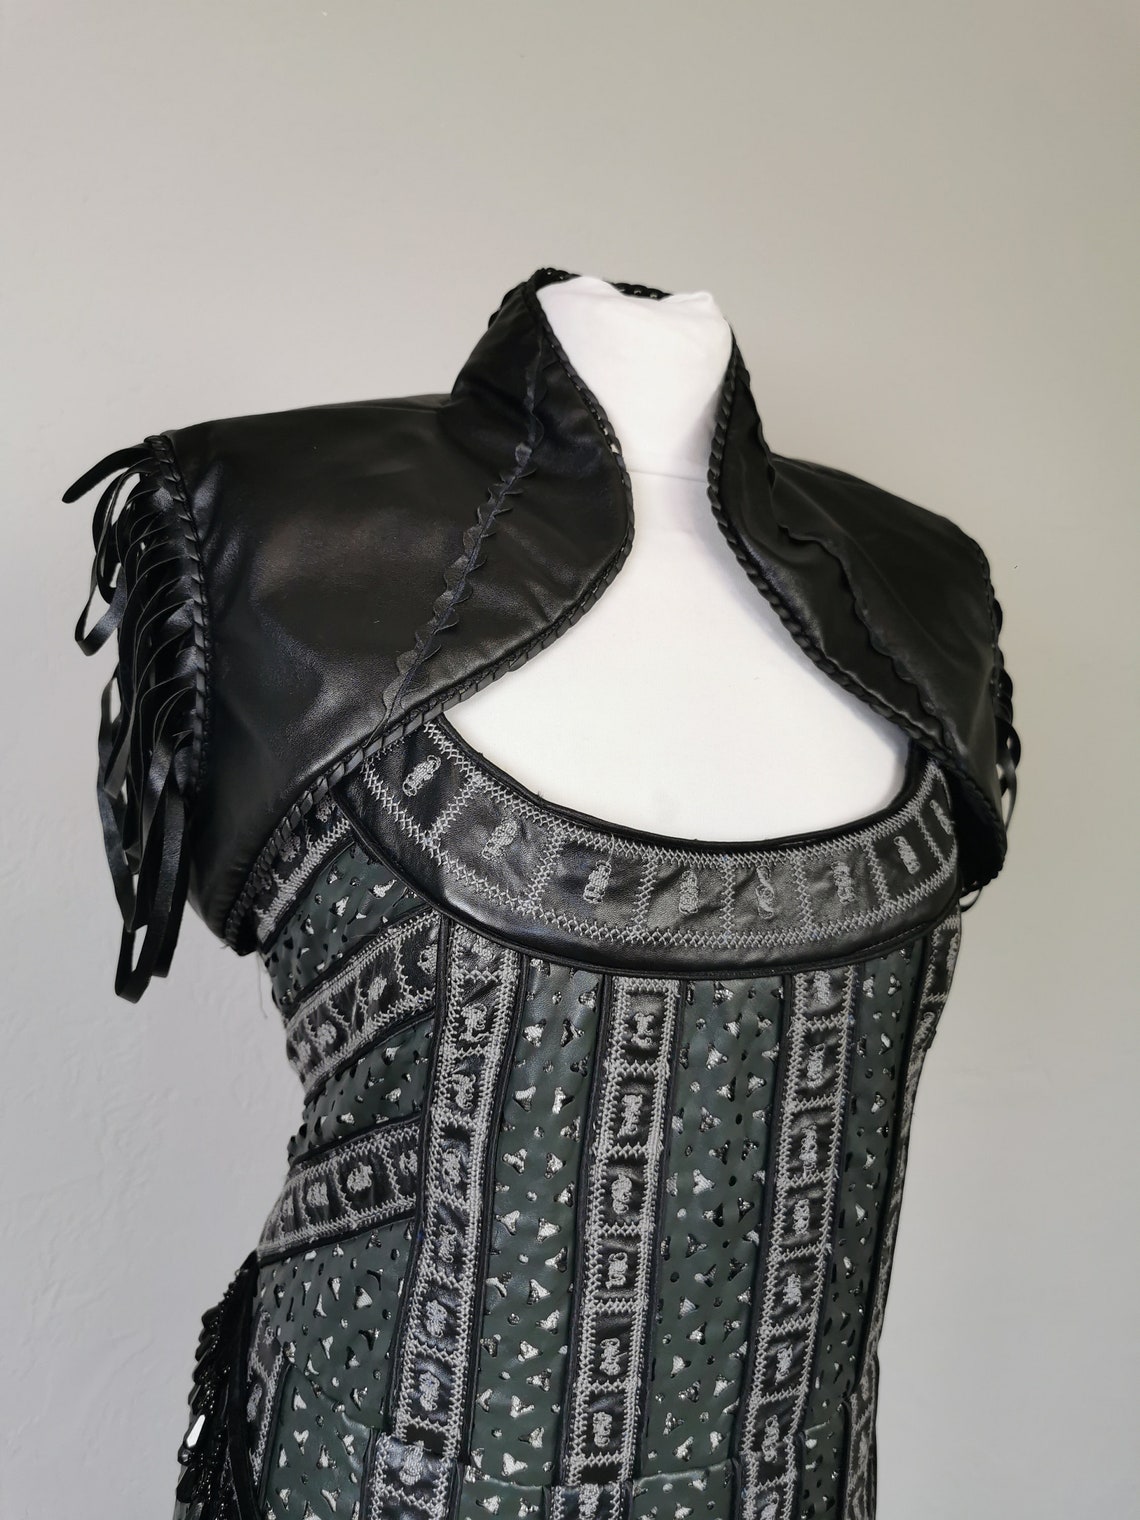 Yennefer The Witcher Series Netflix Cosplay Costume Dress | Etsy